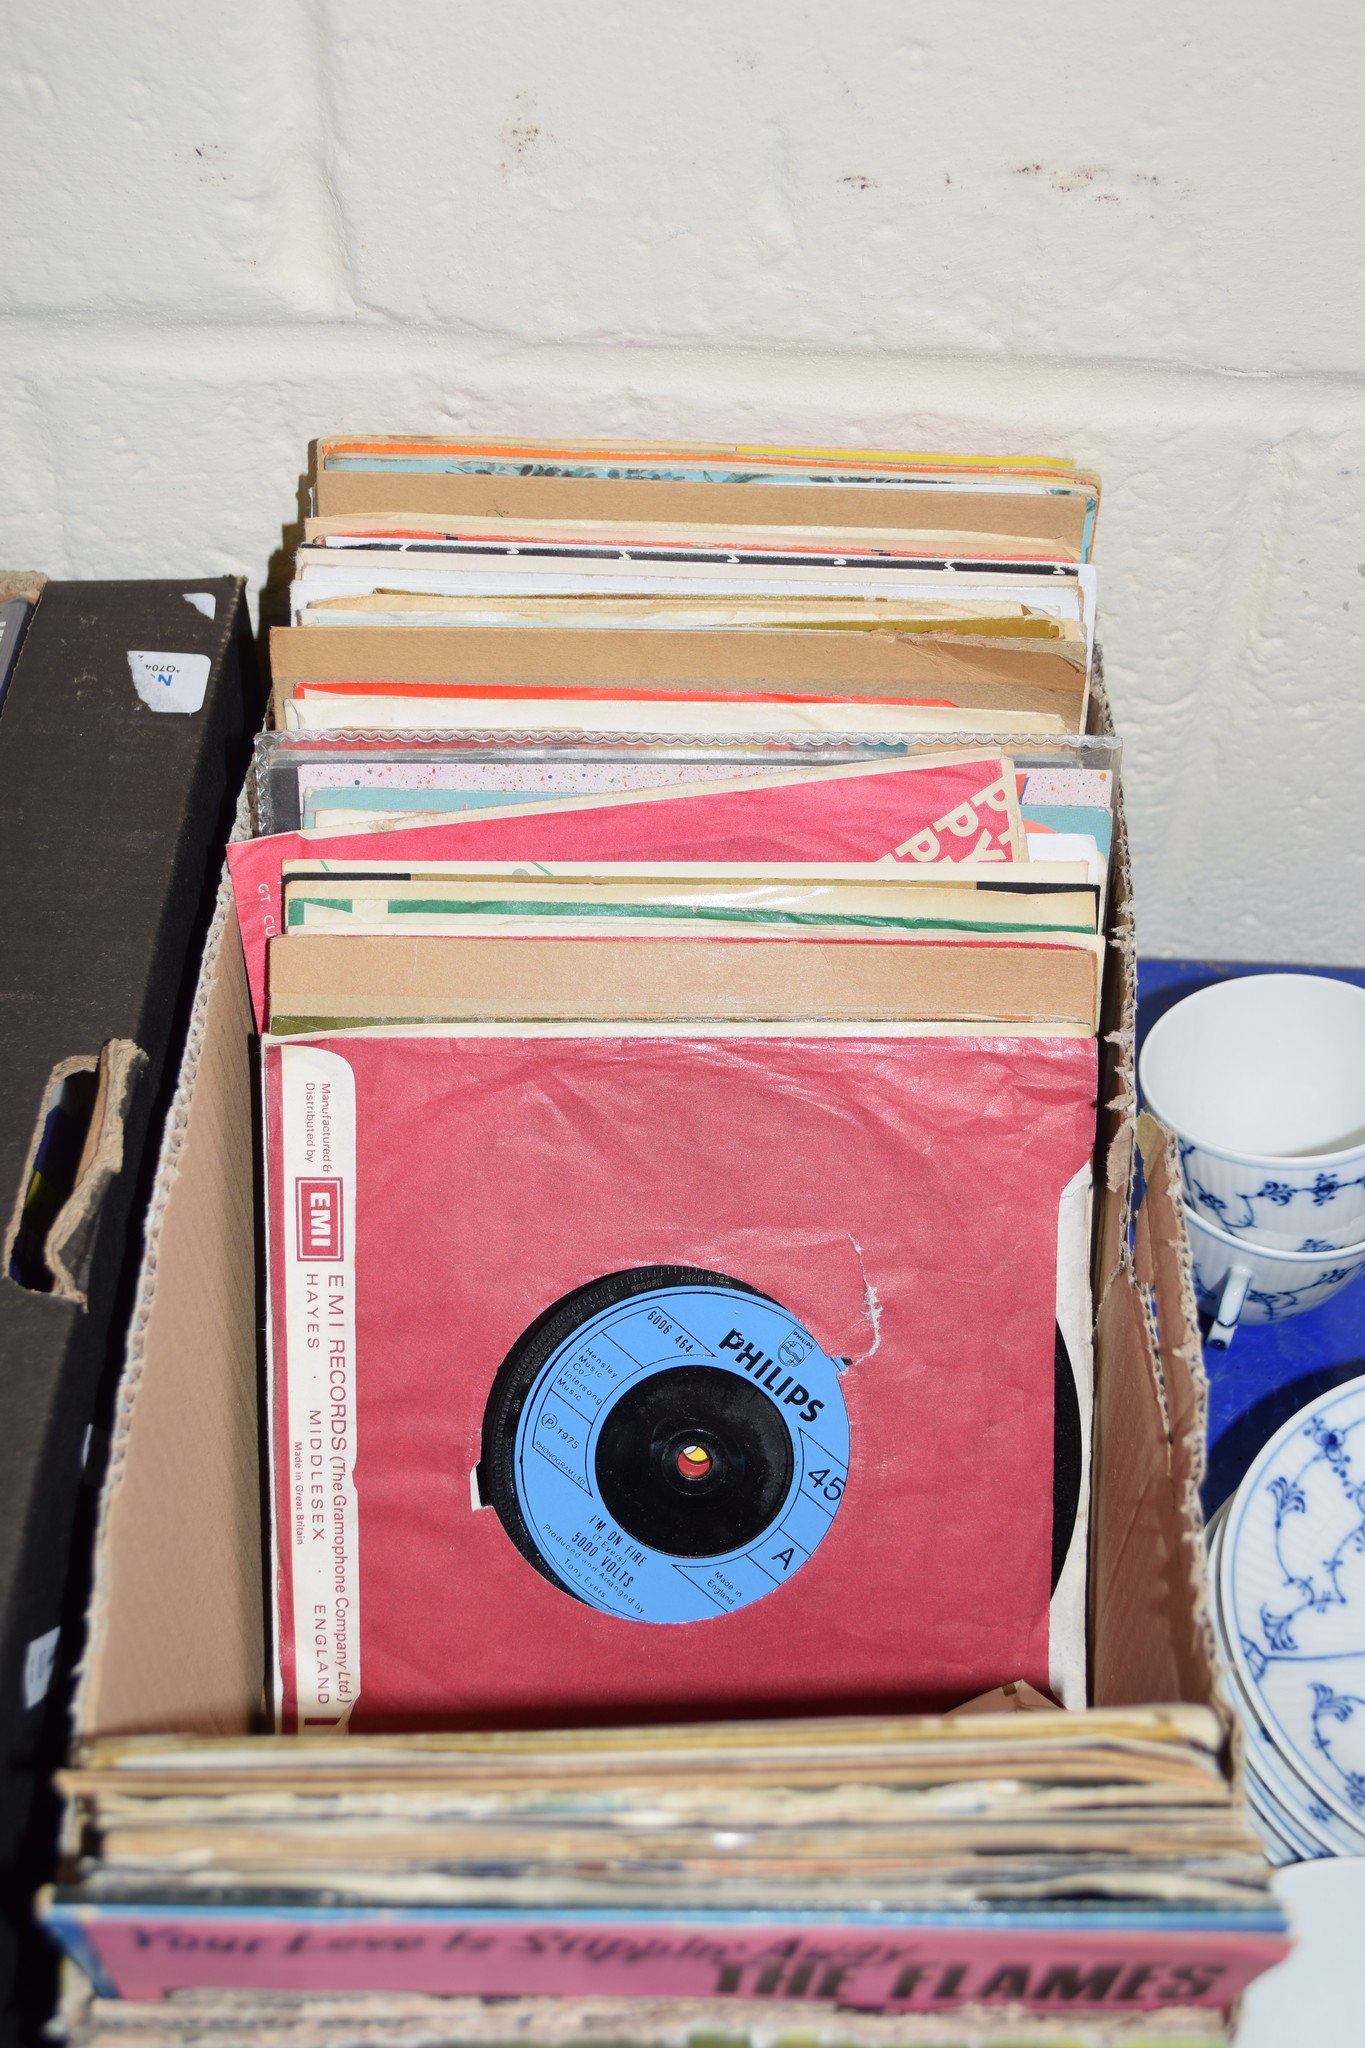 BOX CONTAINING RECORDS, 45RPM, MAINLY POP MUSIC - Image 2 of 3